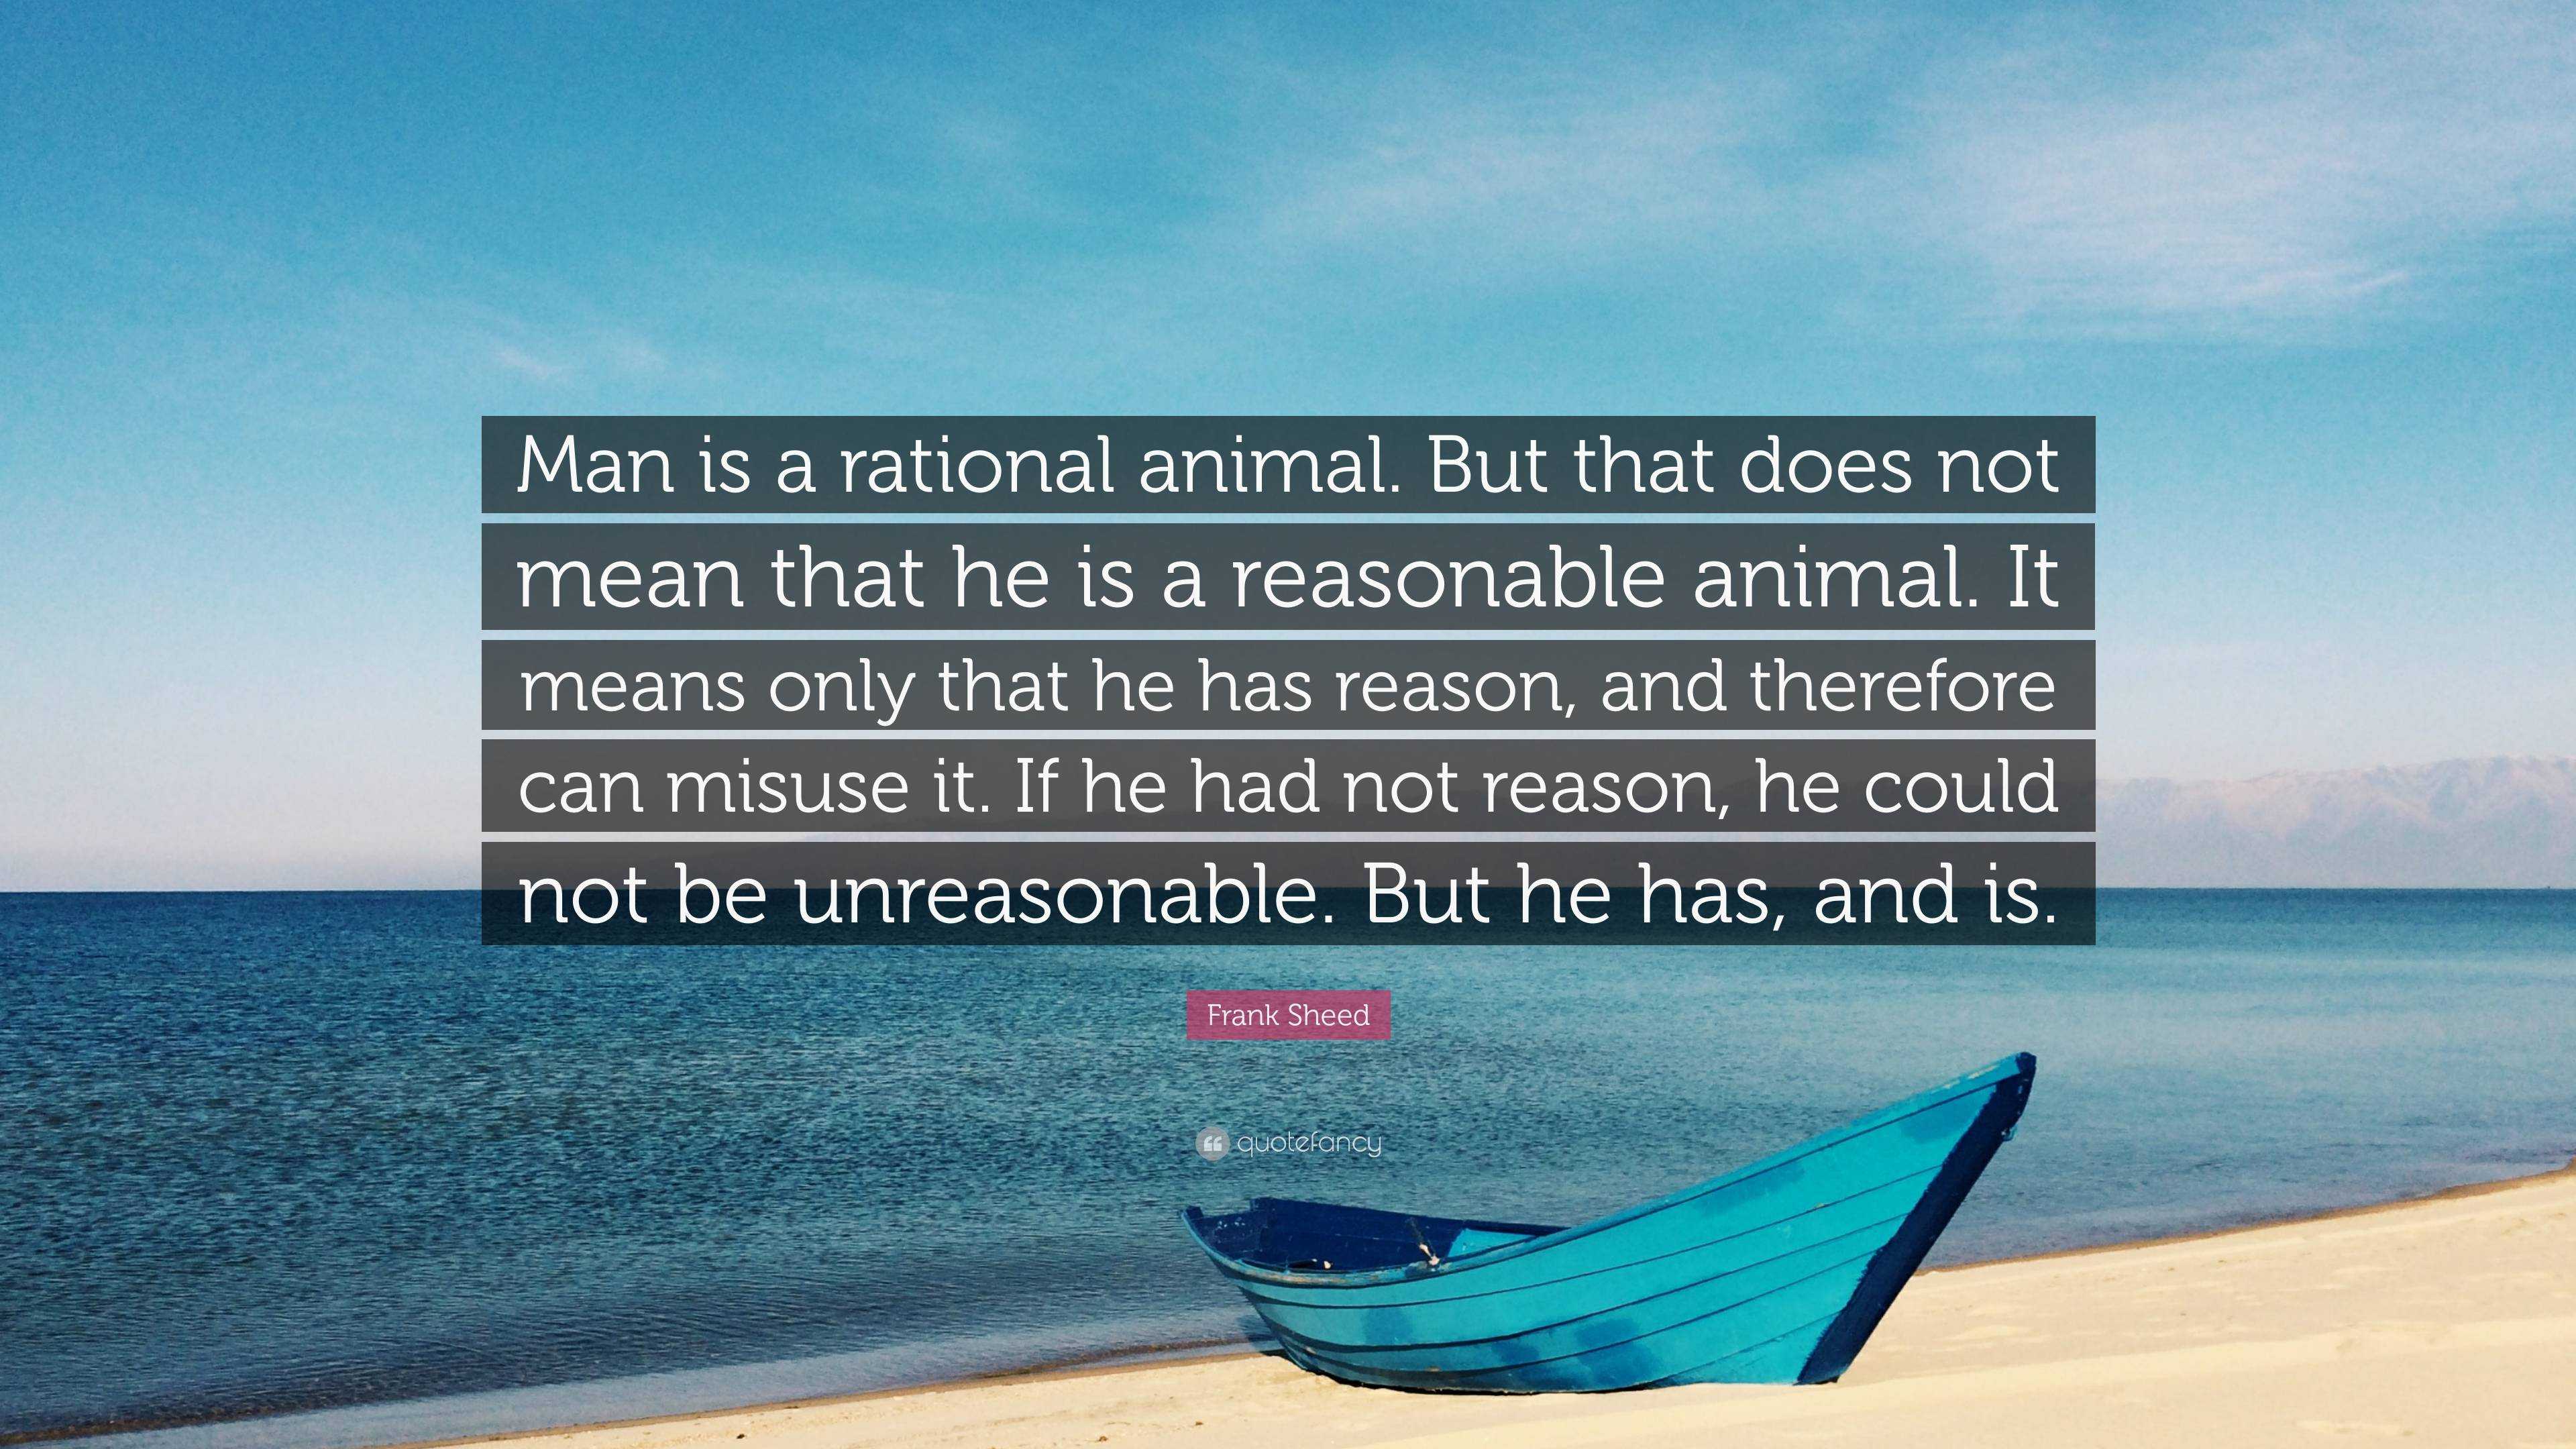 Frank Sheed Quote: “Man is a rational animal. But that does not mean that  he is a reasonable animal. It means only that he has reason, and t...”